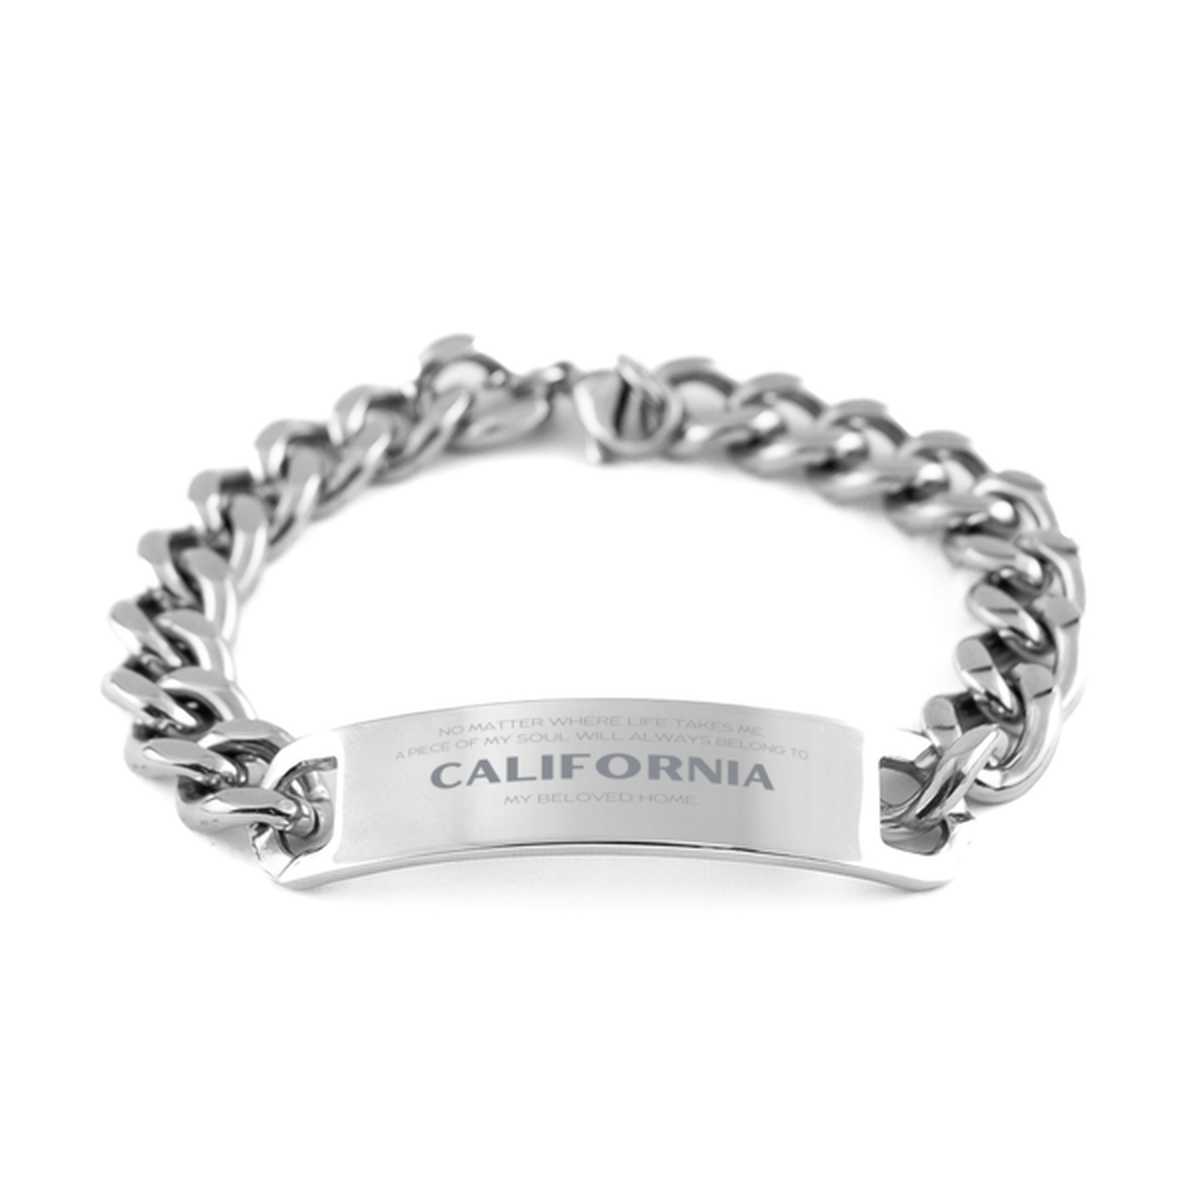 Love California State Gifts, My soul will always belong to California, Proud Cuban Chain Stainless Steel Bracelet, Birthday Unique Gifts For California Men, Women, Friends